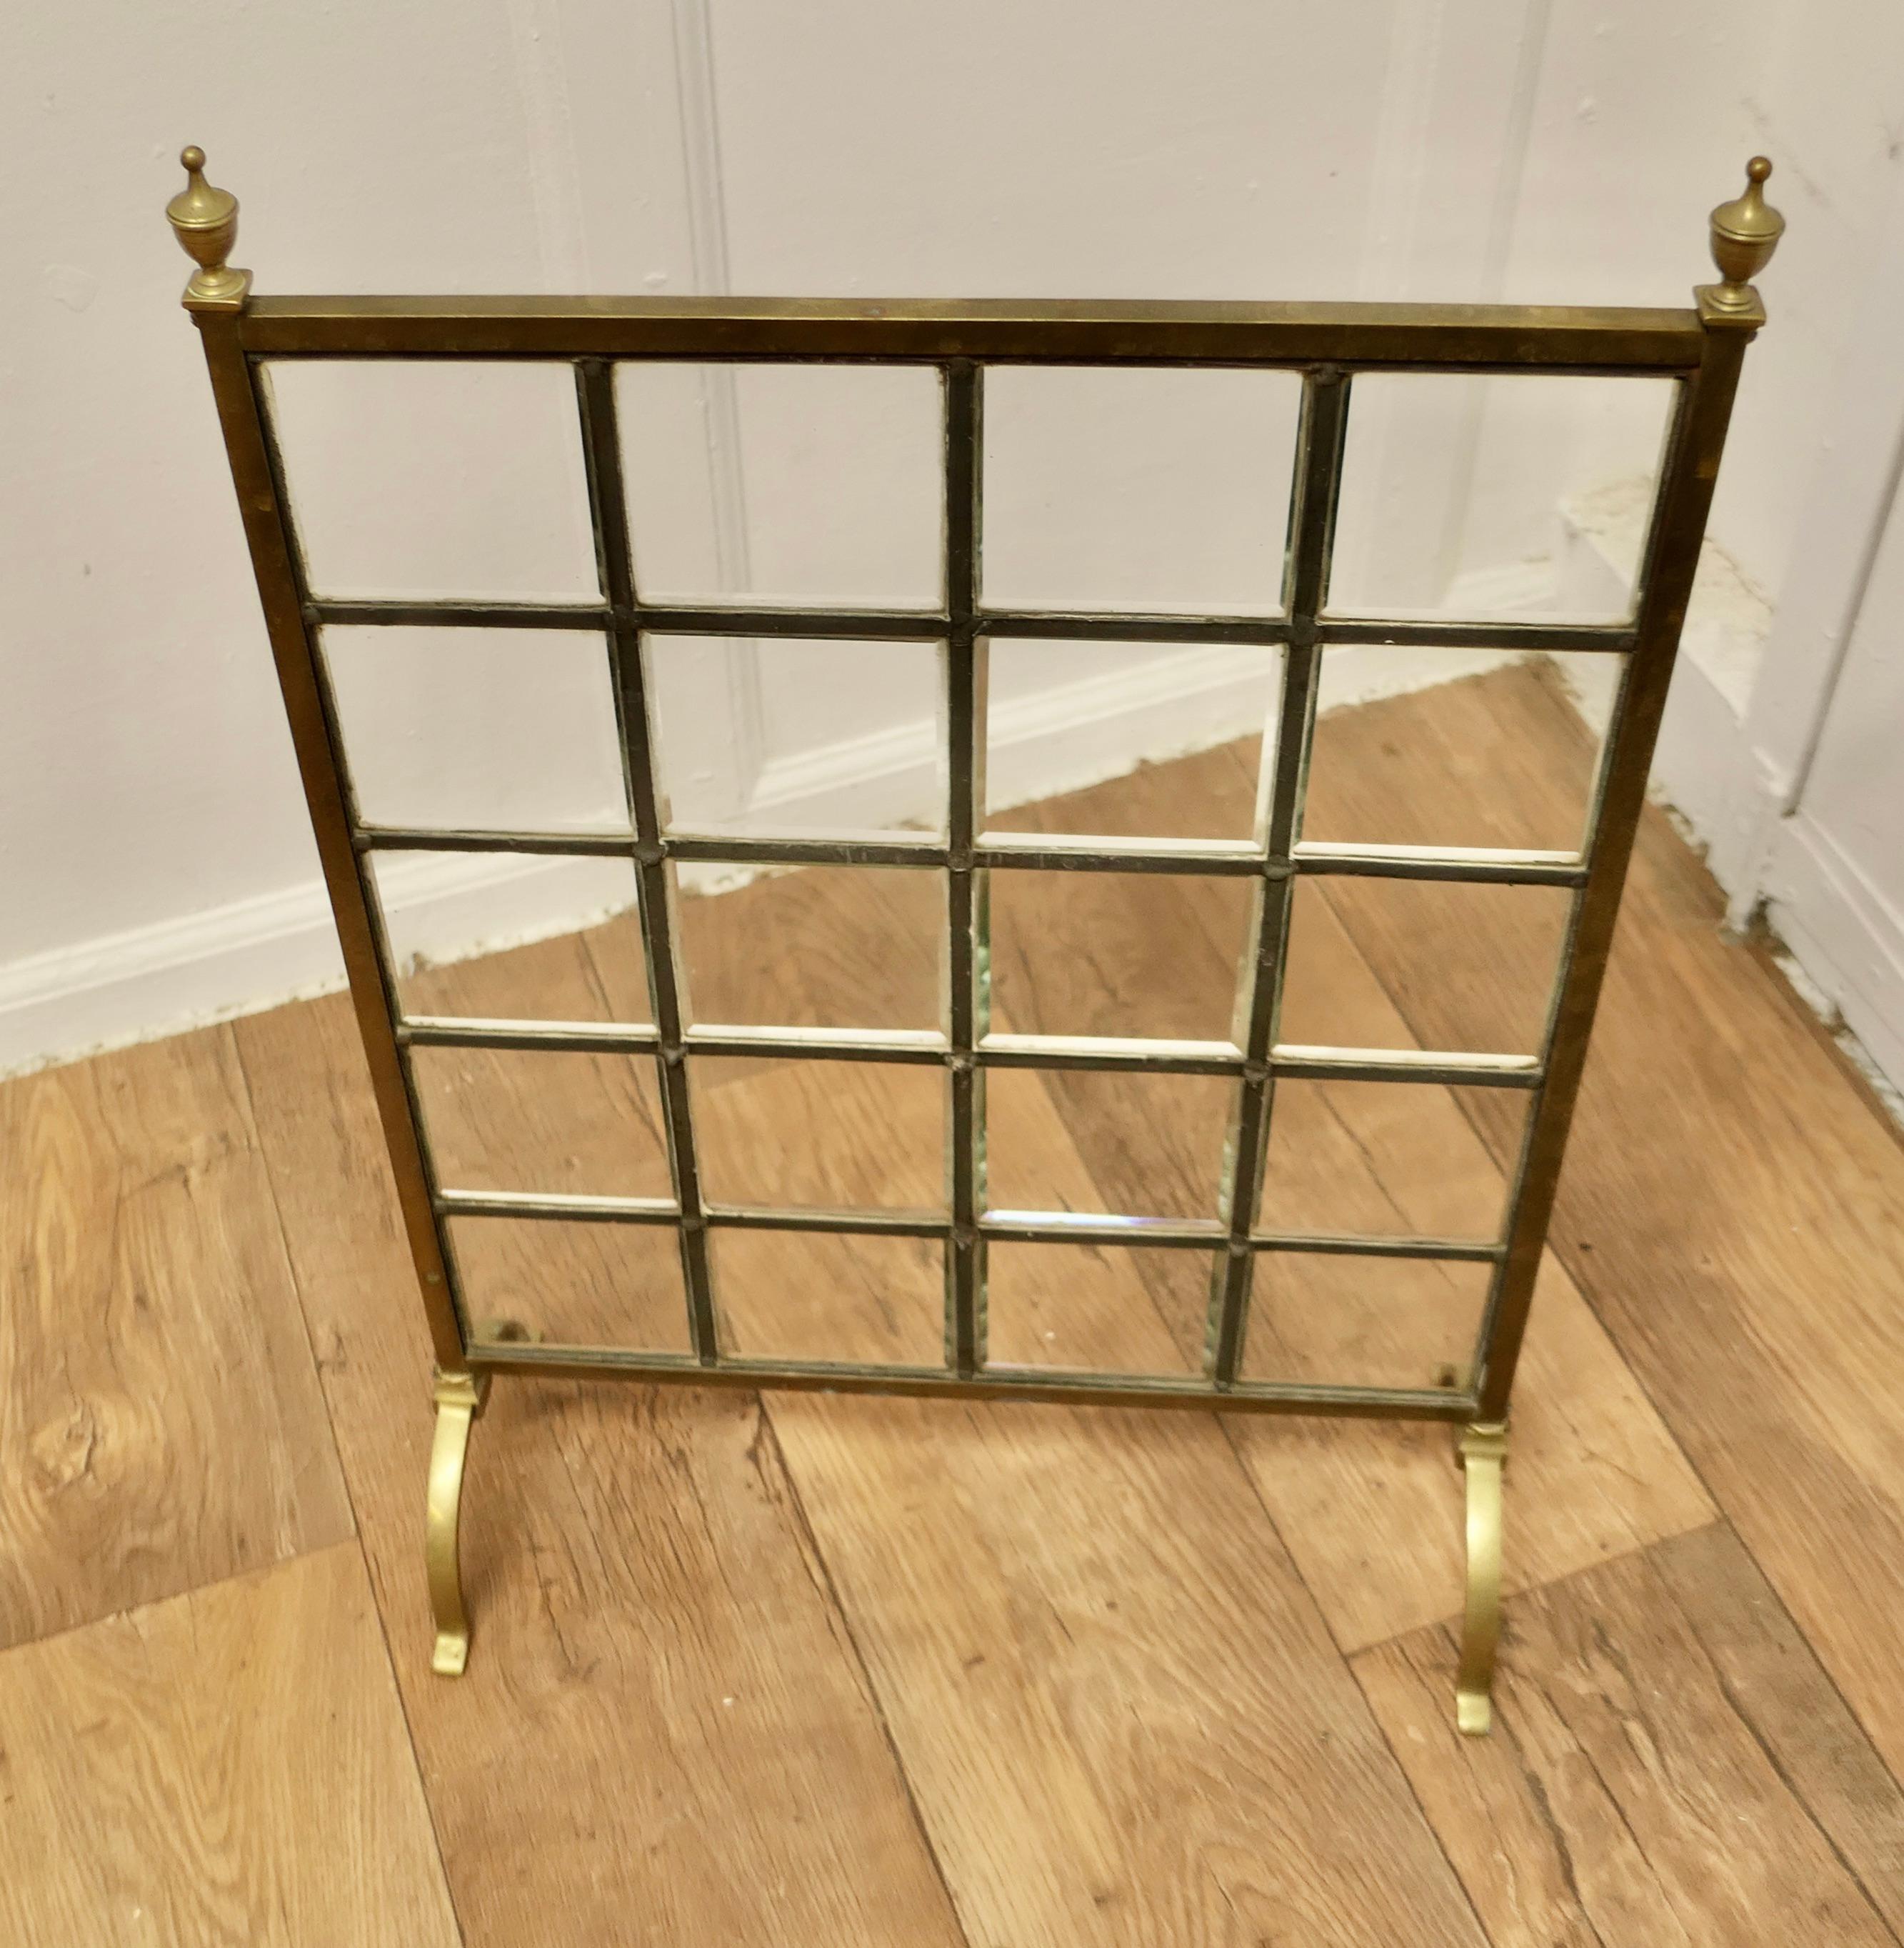 A Victorian Brass and Glass Art Nouveau Fire Screen    In Good Condition For Sale In Chillerton, Isle of Wight